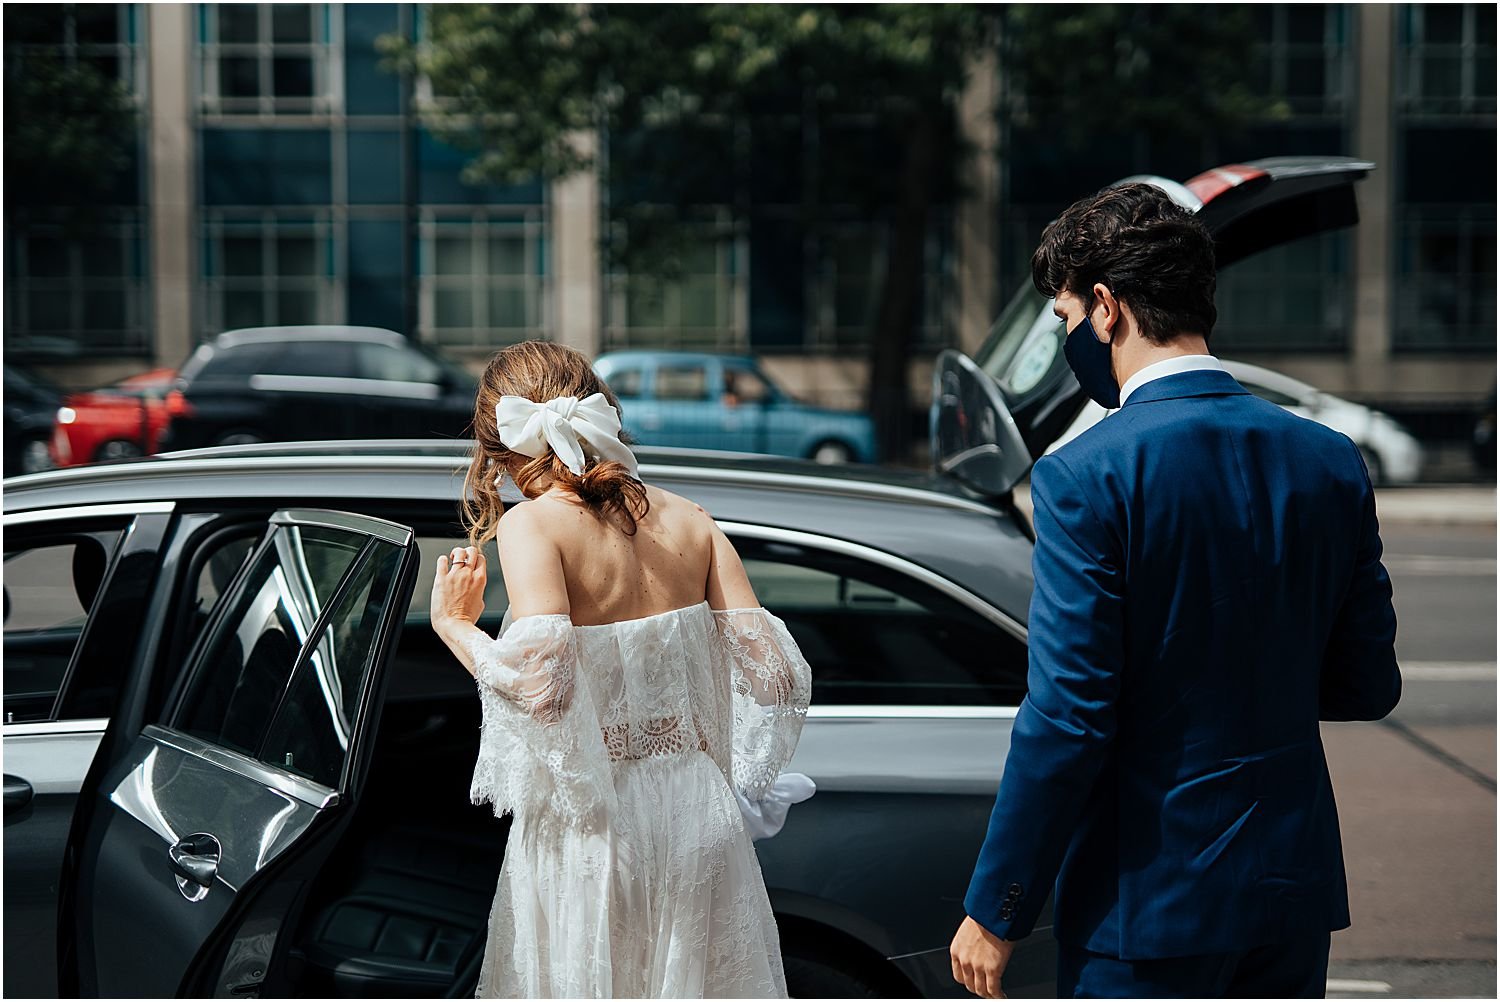 Bride and groom getting in car